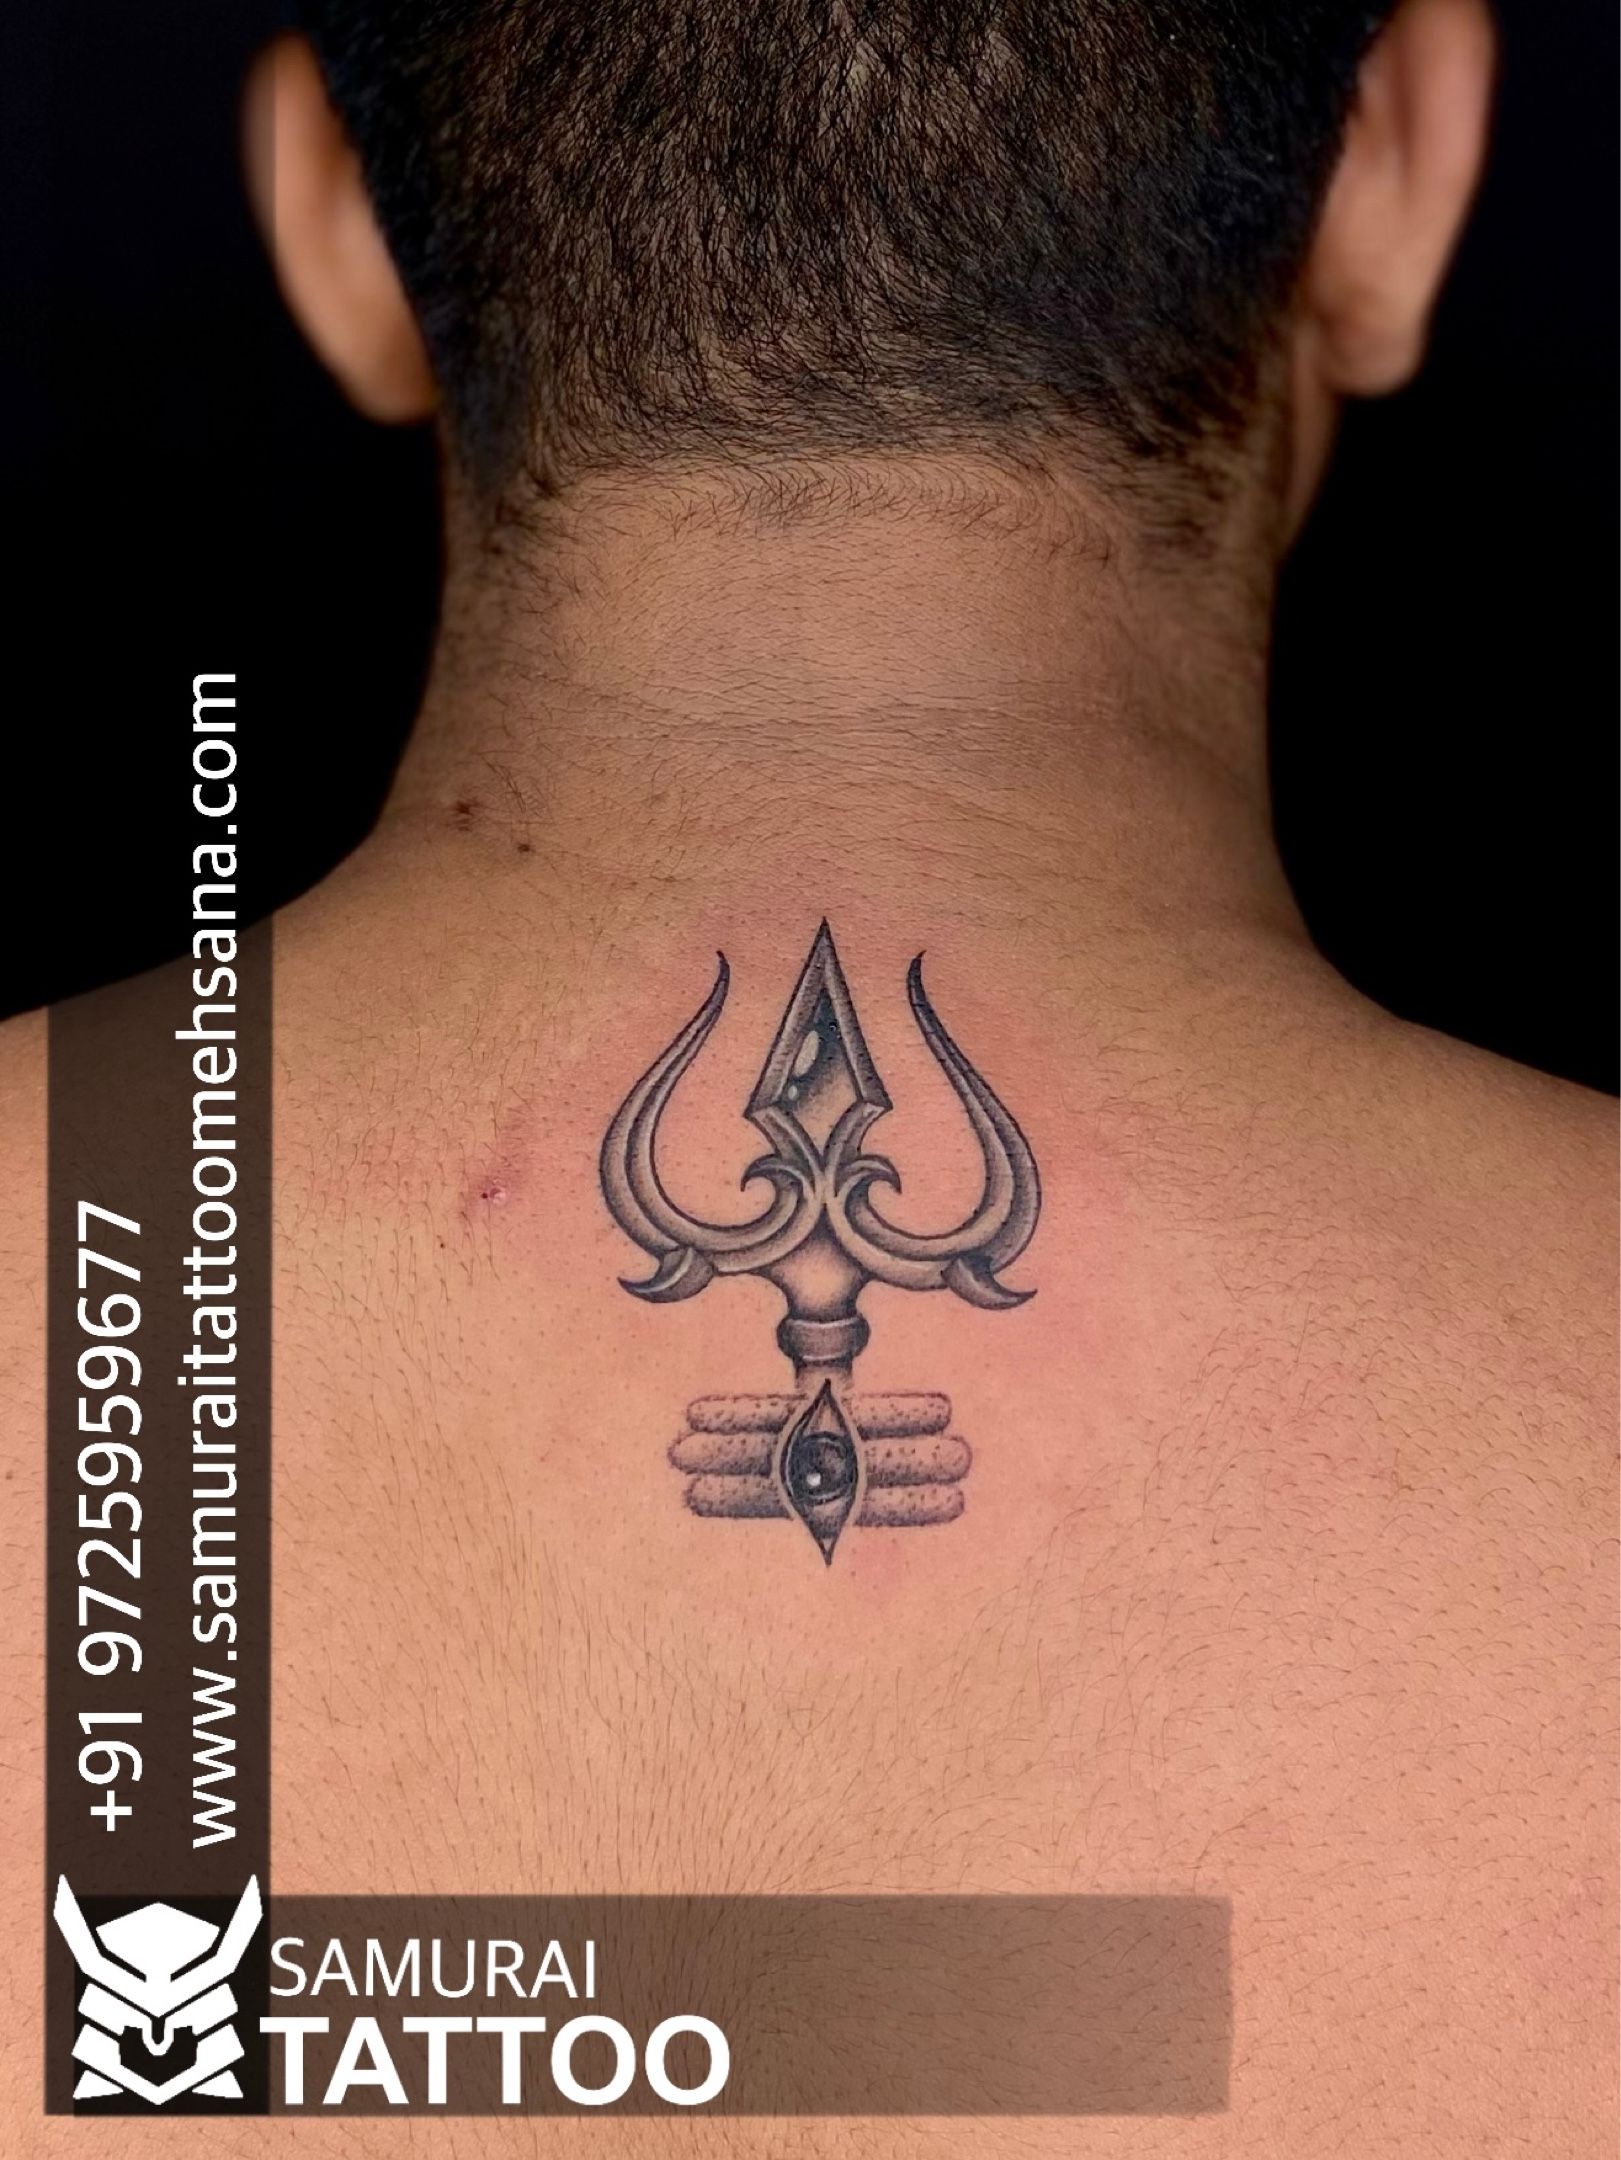 Empowered by the Devine Trinity, my journey unfolds with the strength of  the trishul by my side. 